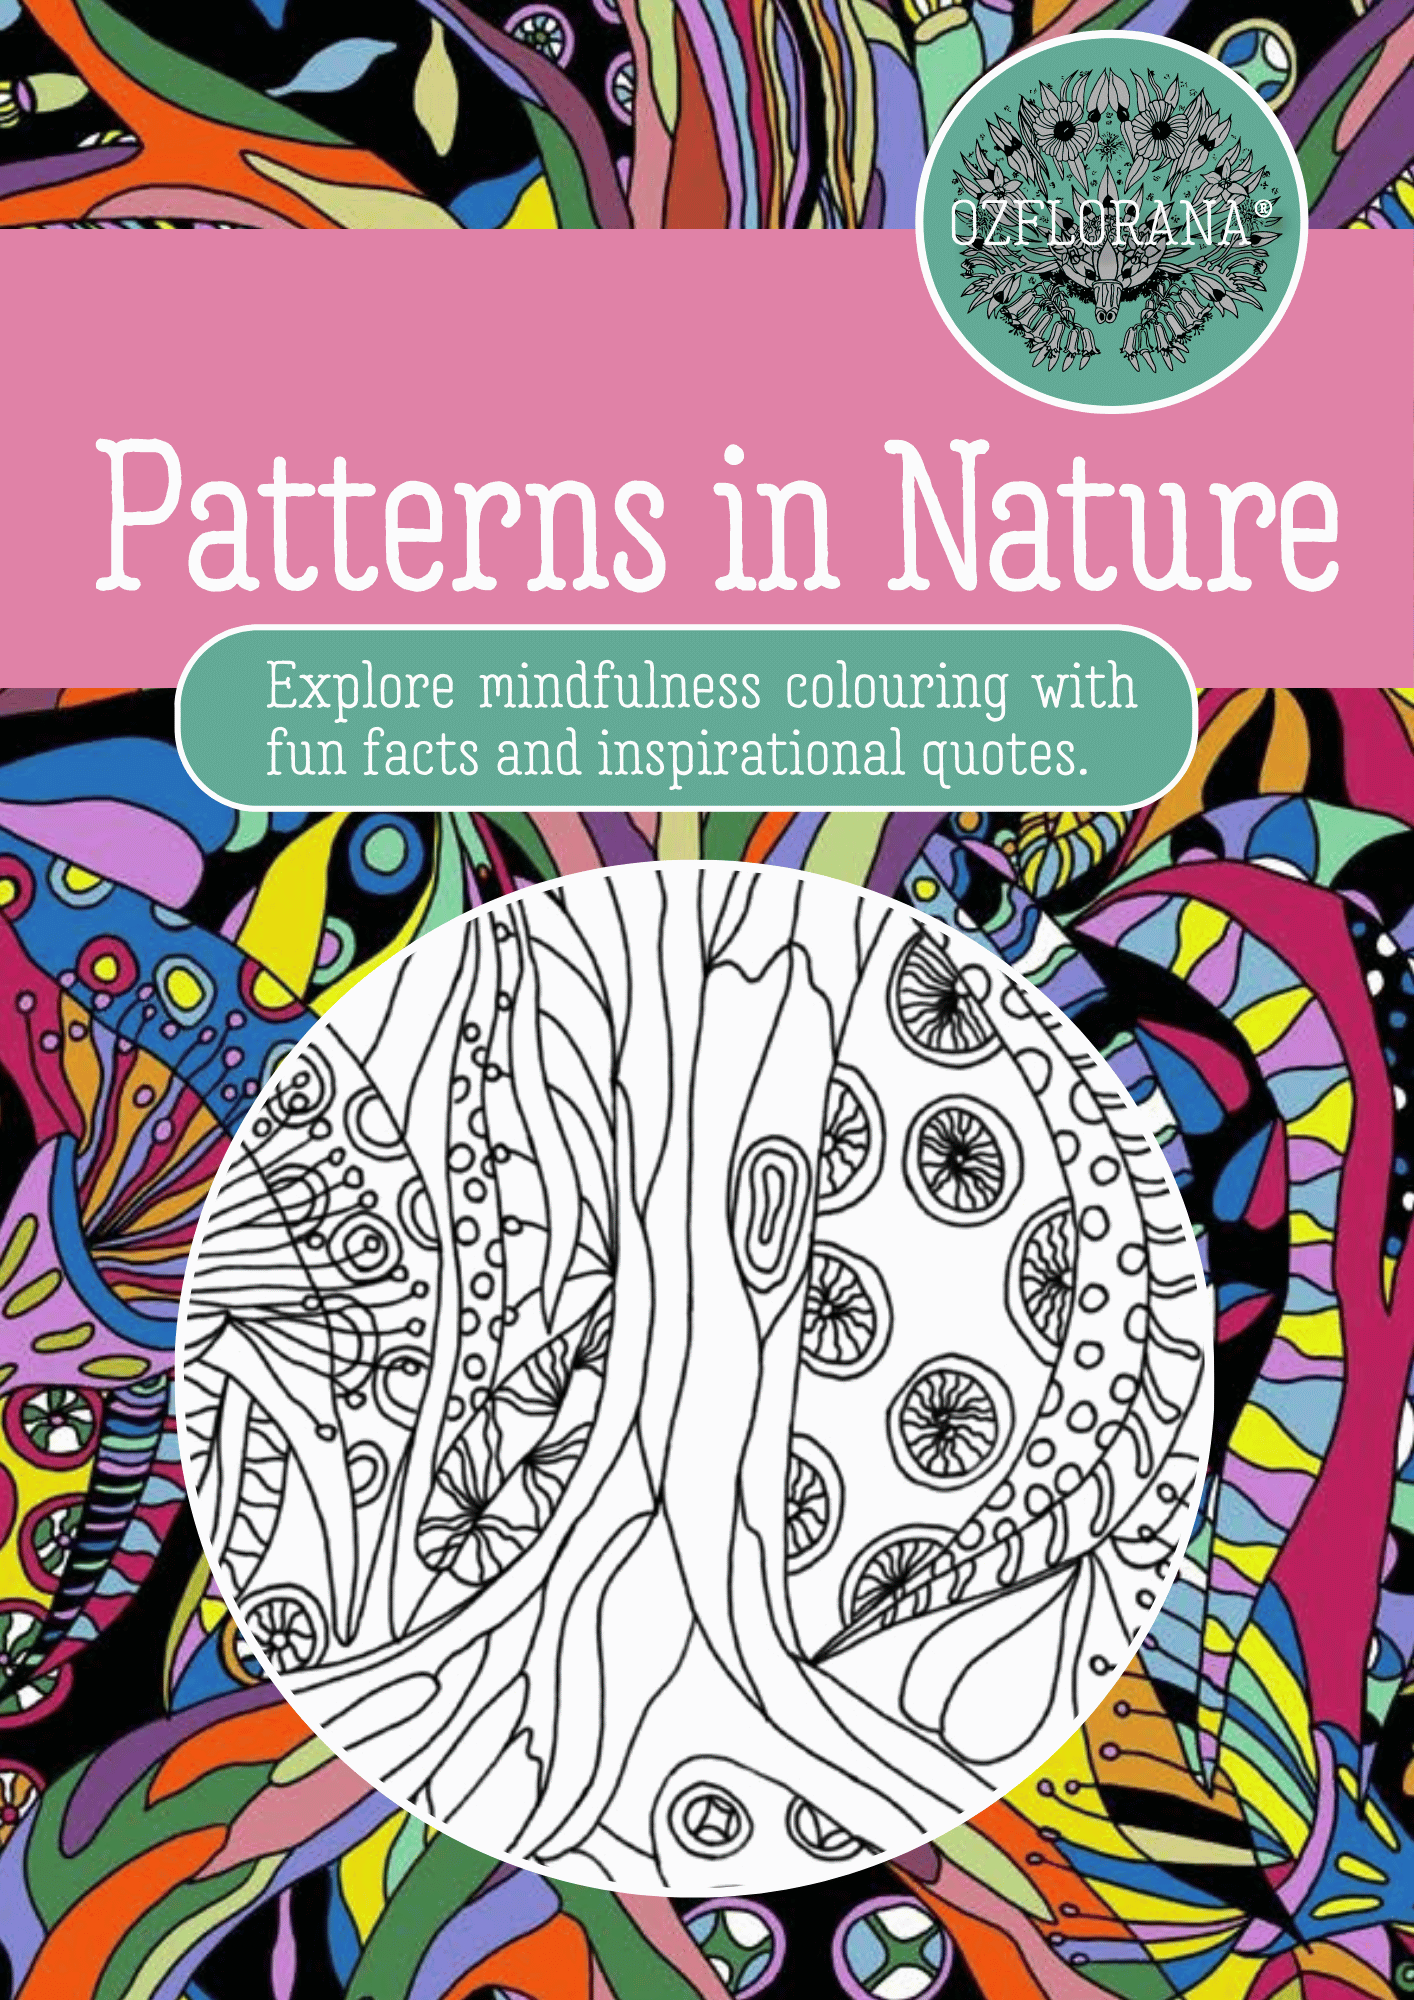 Patterns in Nature by Ozflorana( New Release)